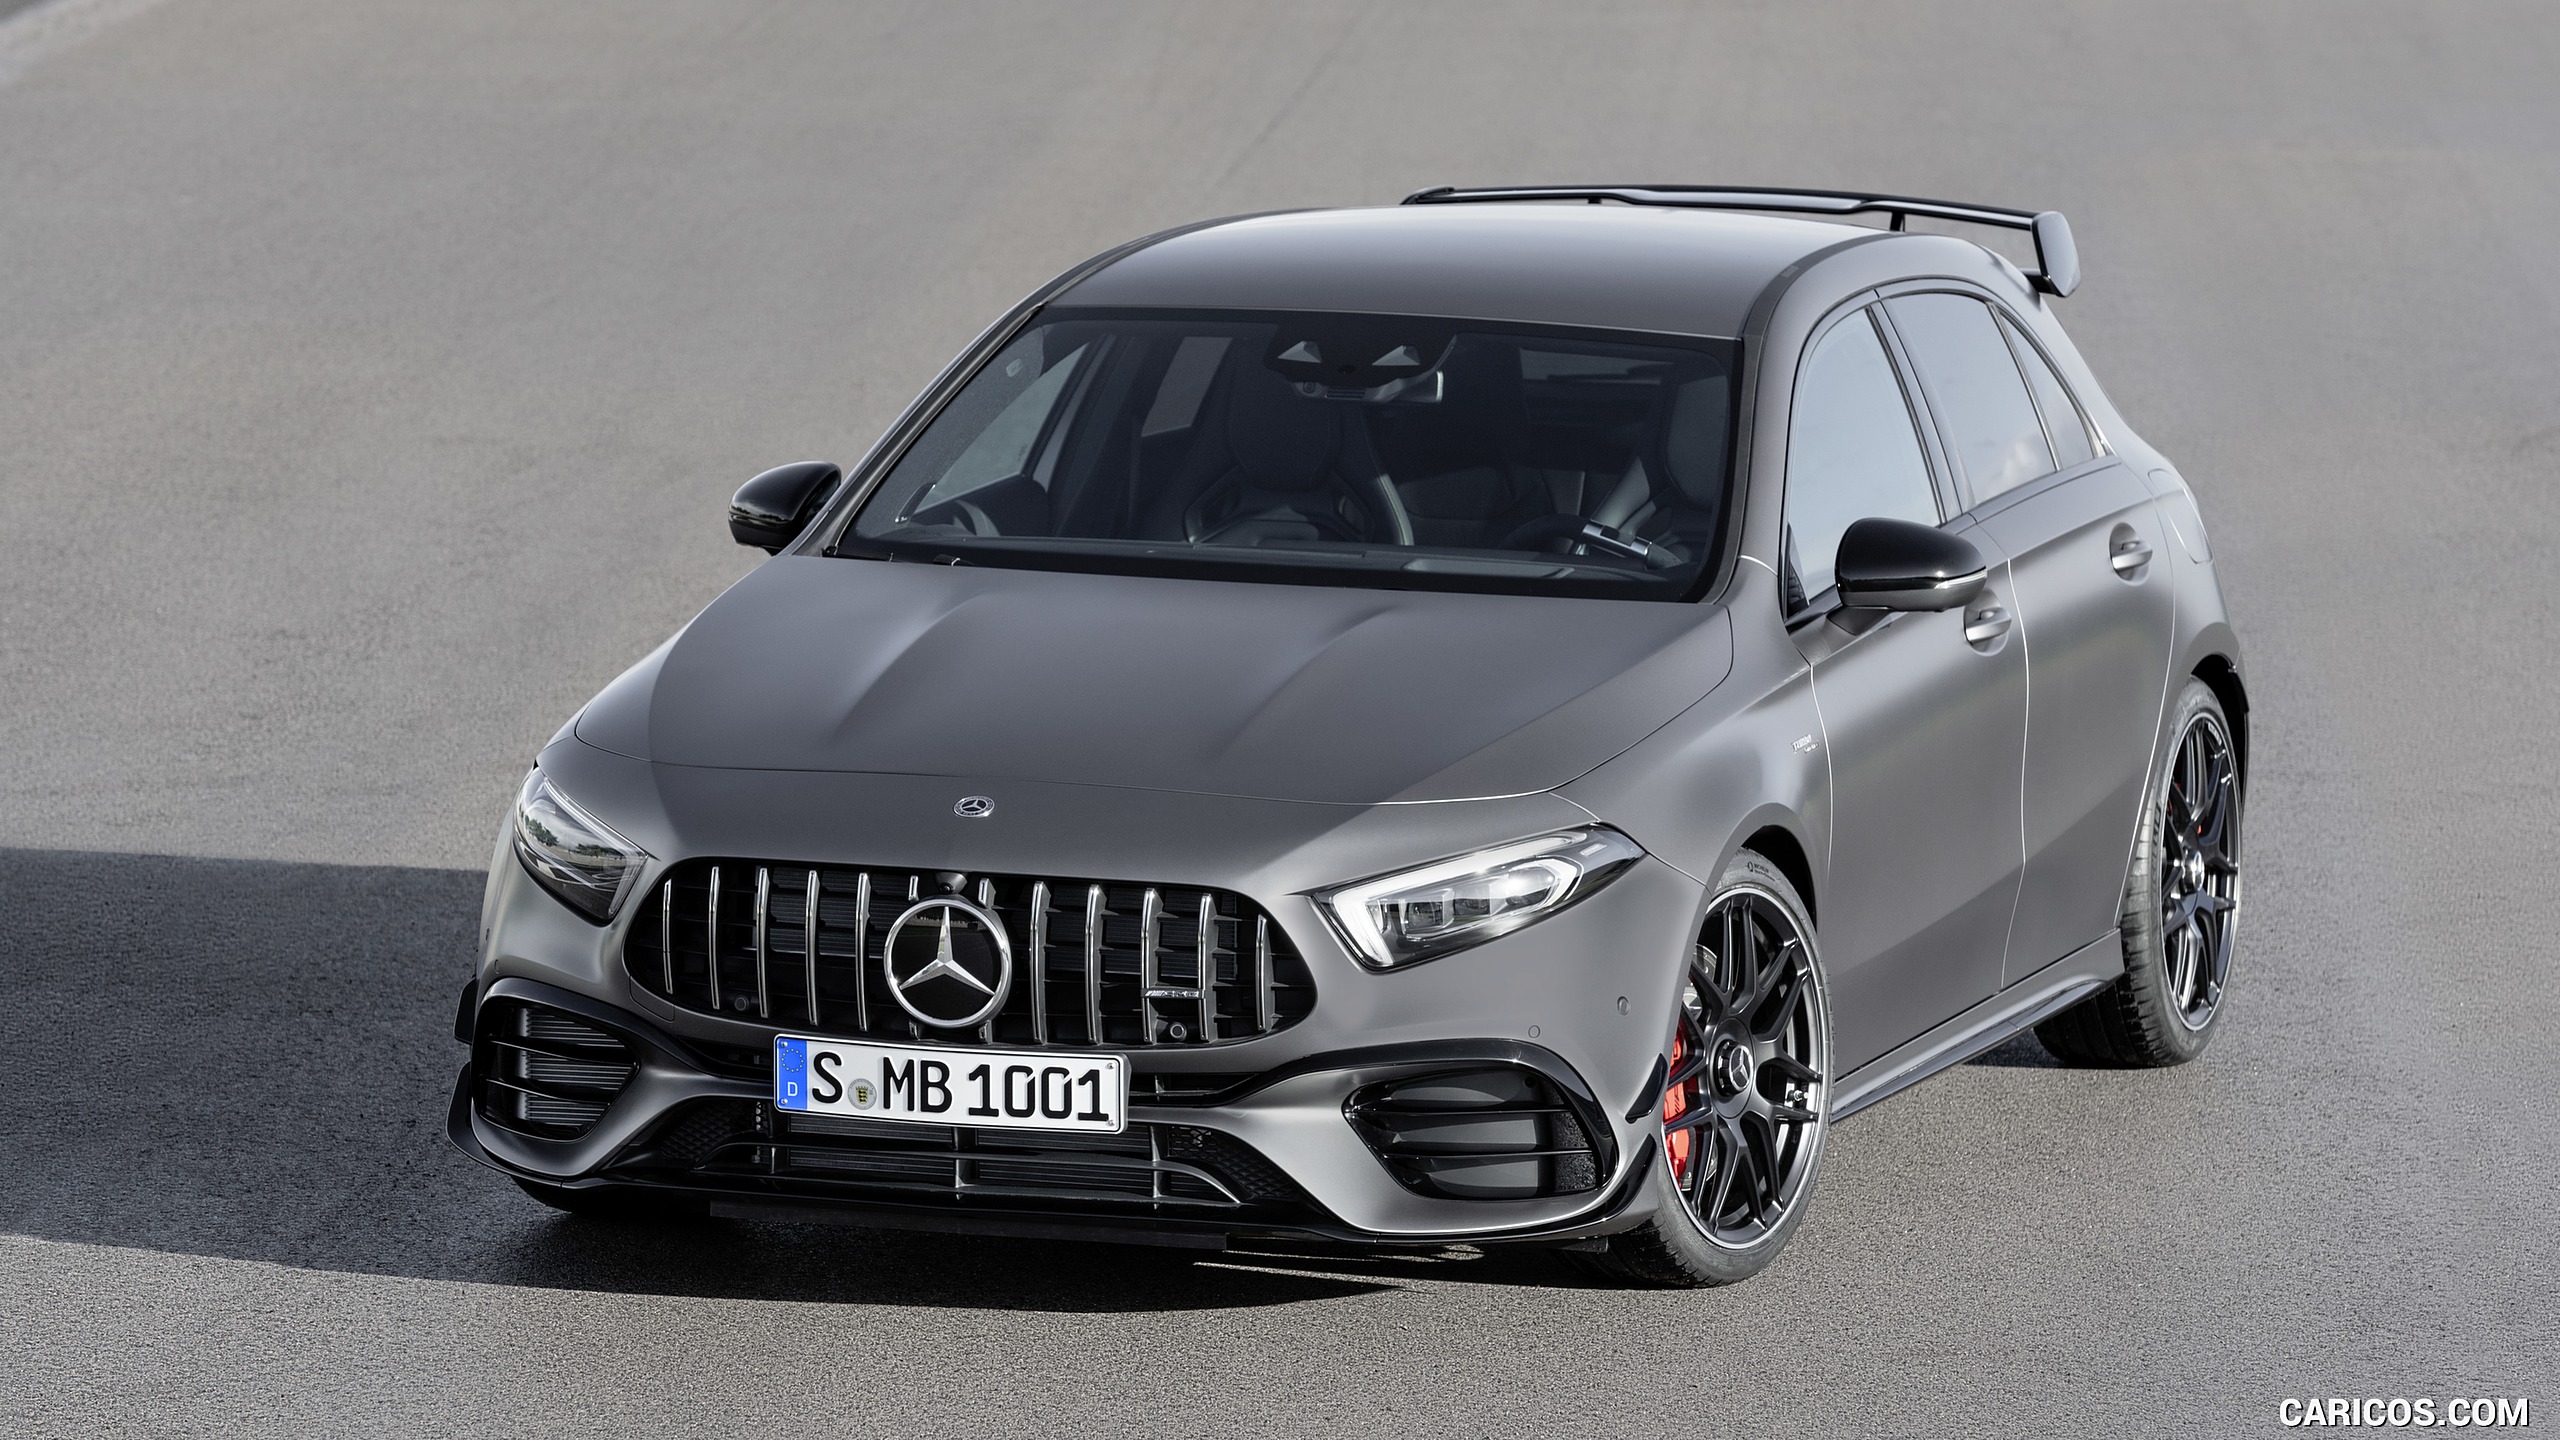 2020 Mercedes-AMG A 45 S 4MATIC+ - Front, #18 of 188